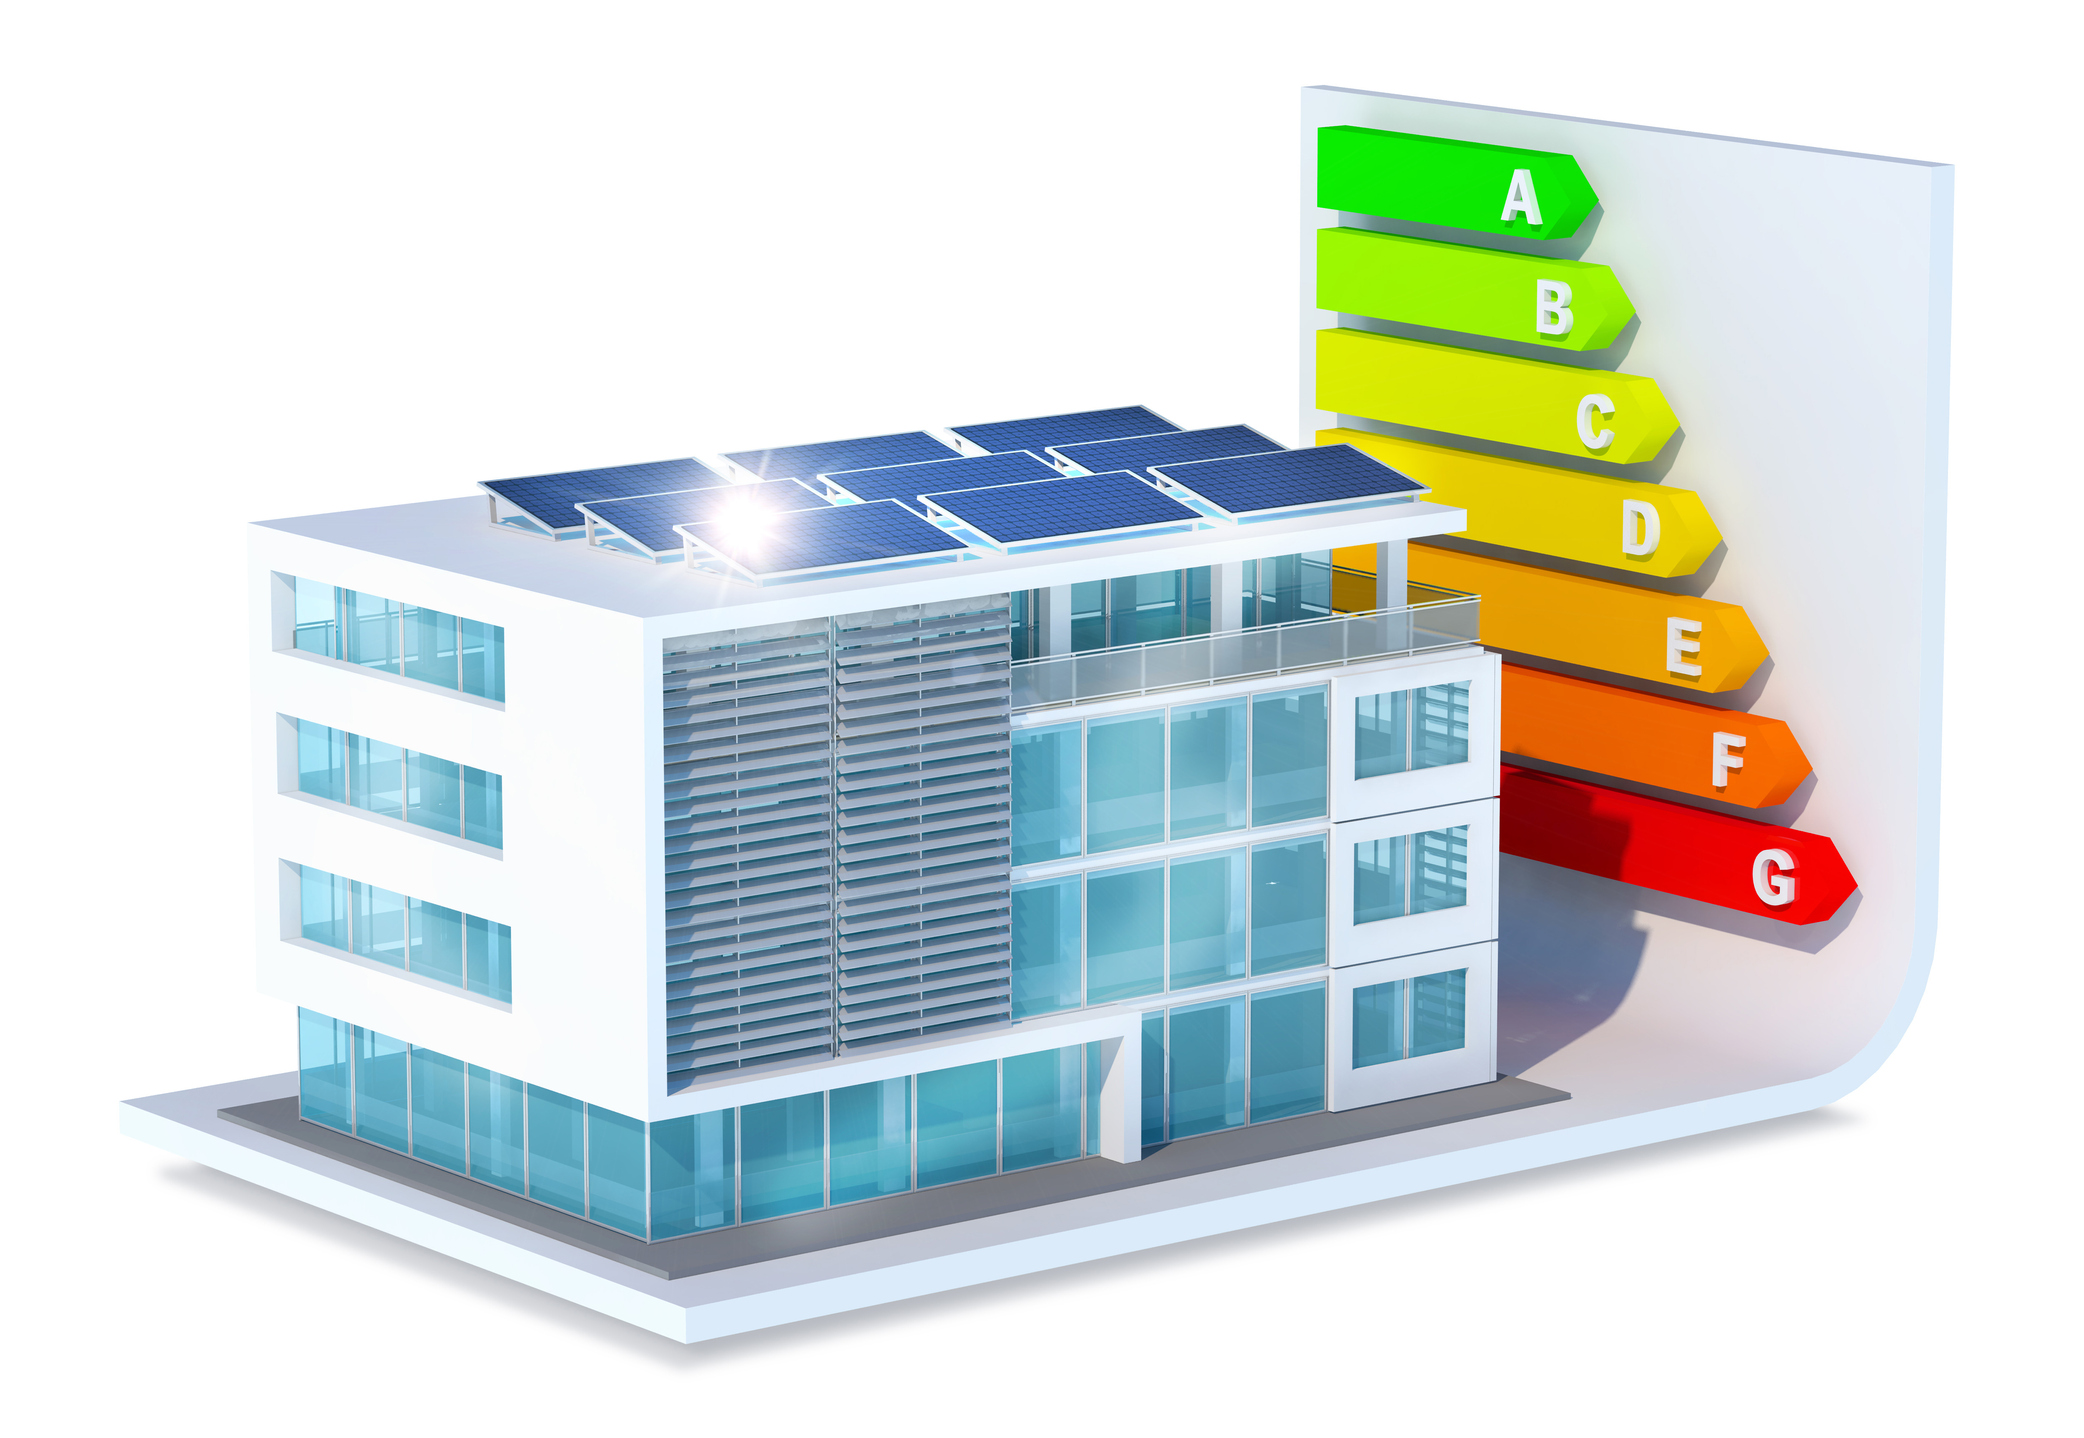 Infographic showing solar panels on a corporate rooftop and energy ratings